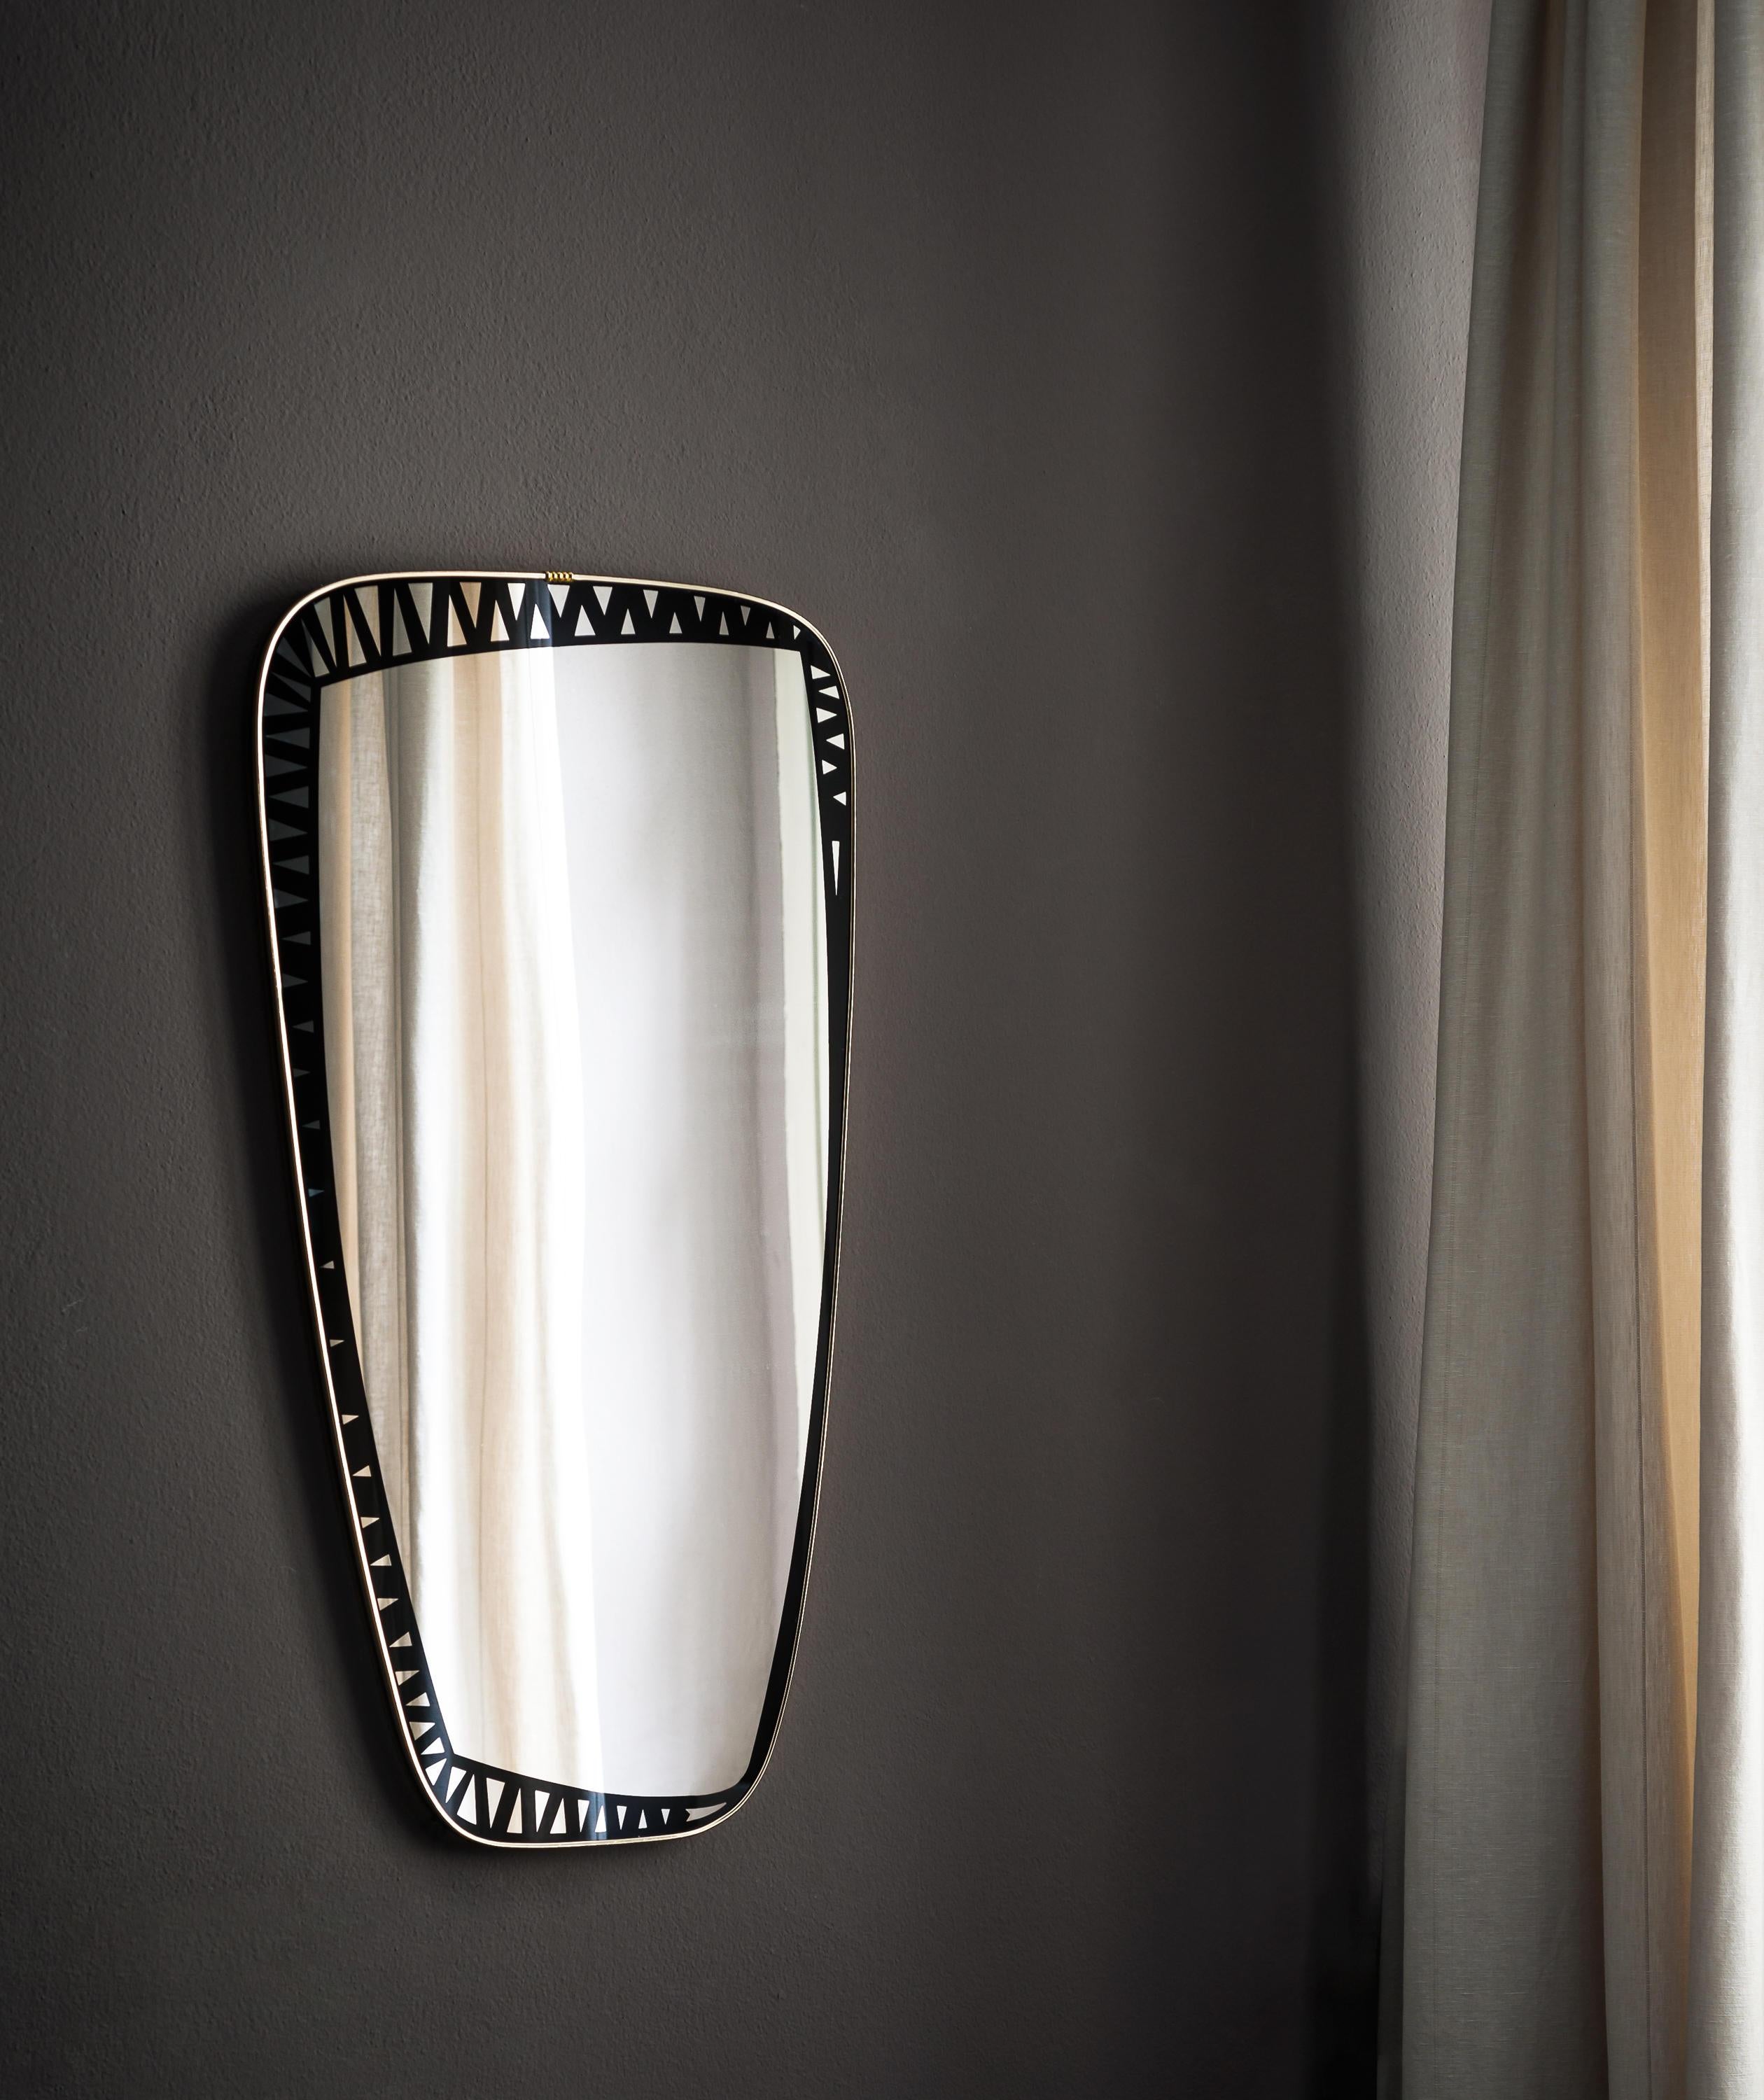 Mirrors serve to amplify a space: not only because they make it seem larger, but also because they show impossible points of view, where you look left to see to the right, and to see behind, you don’t have to turn around. Dorian mirror is a